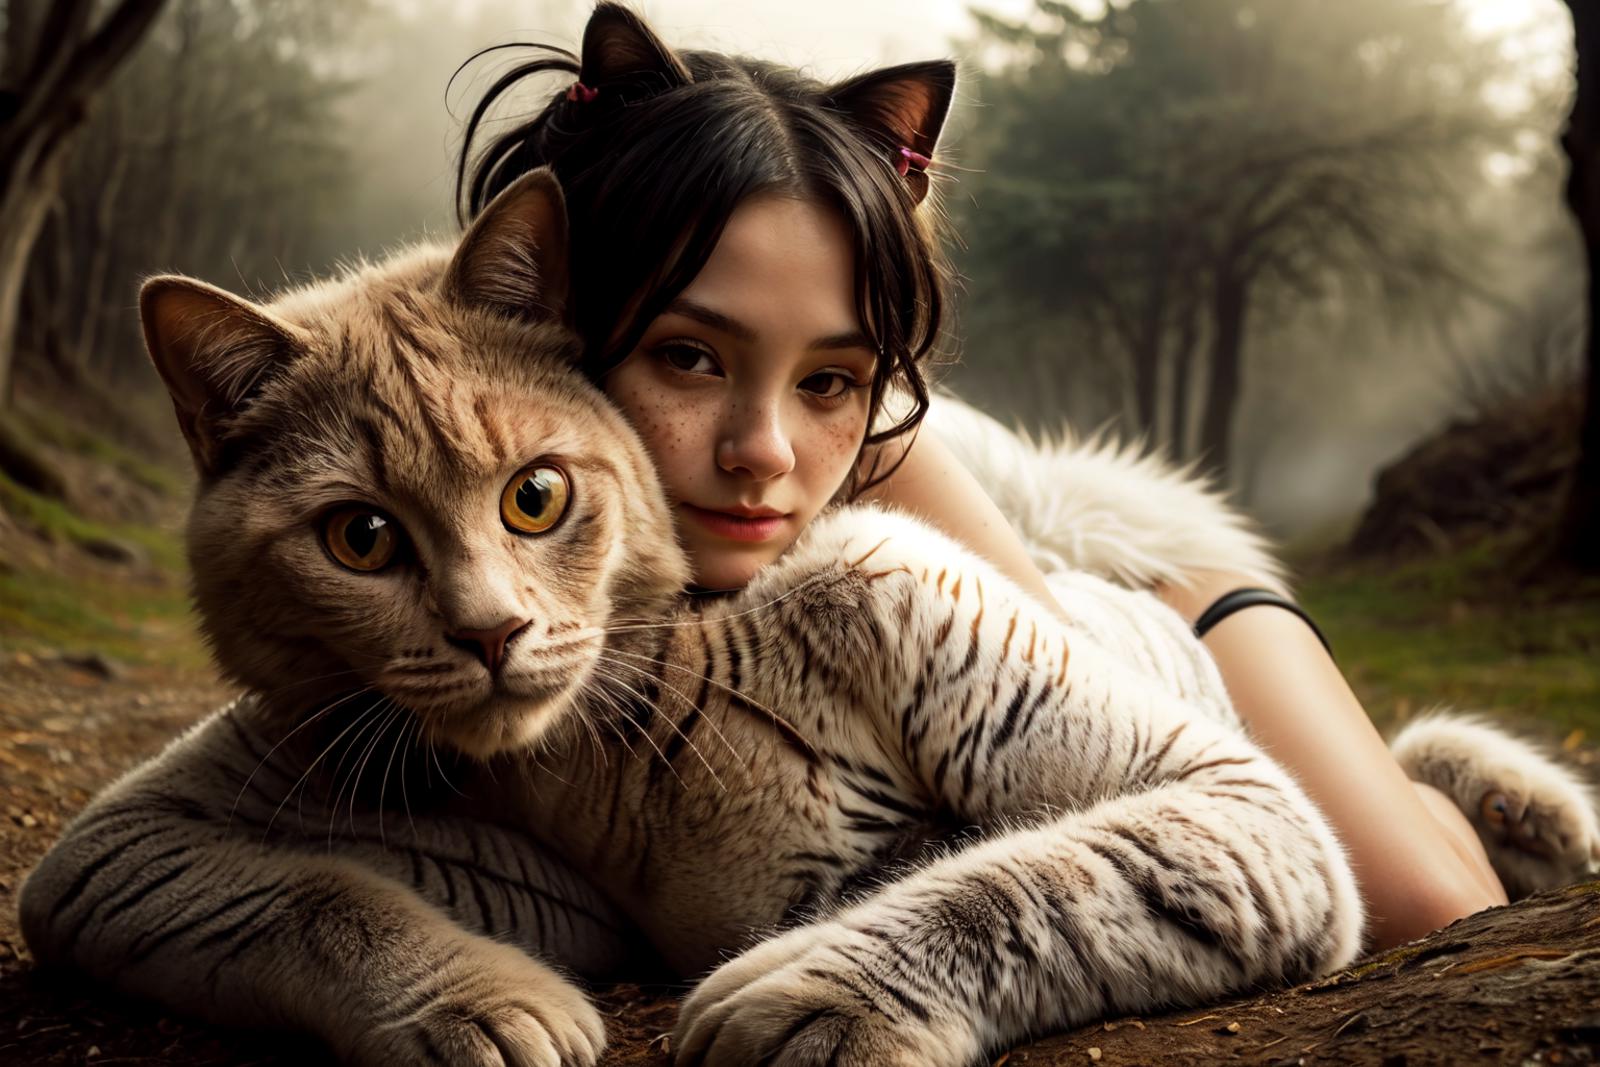 A young girl hugging a tiger cat on a bed.